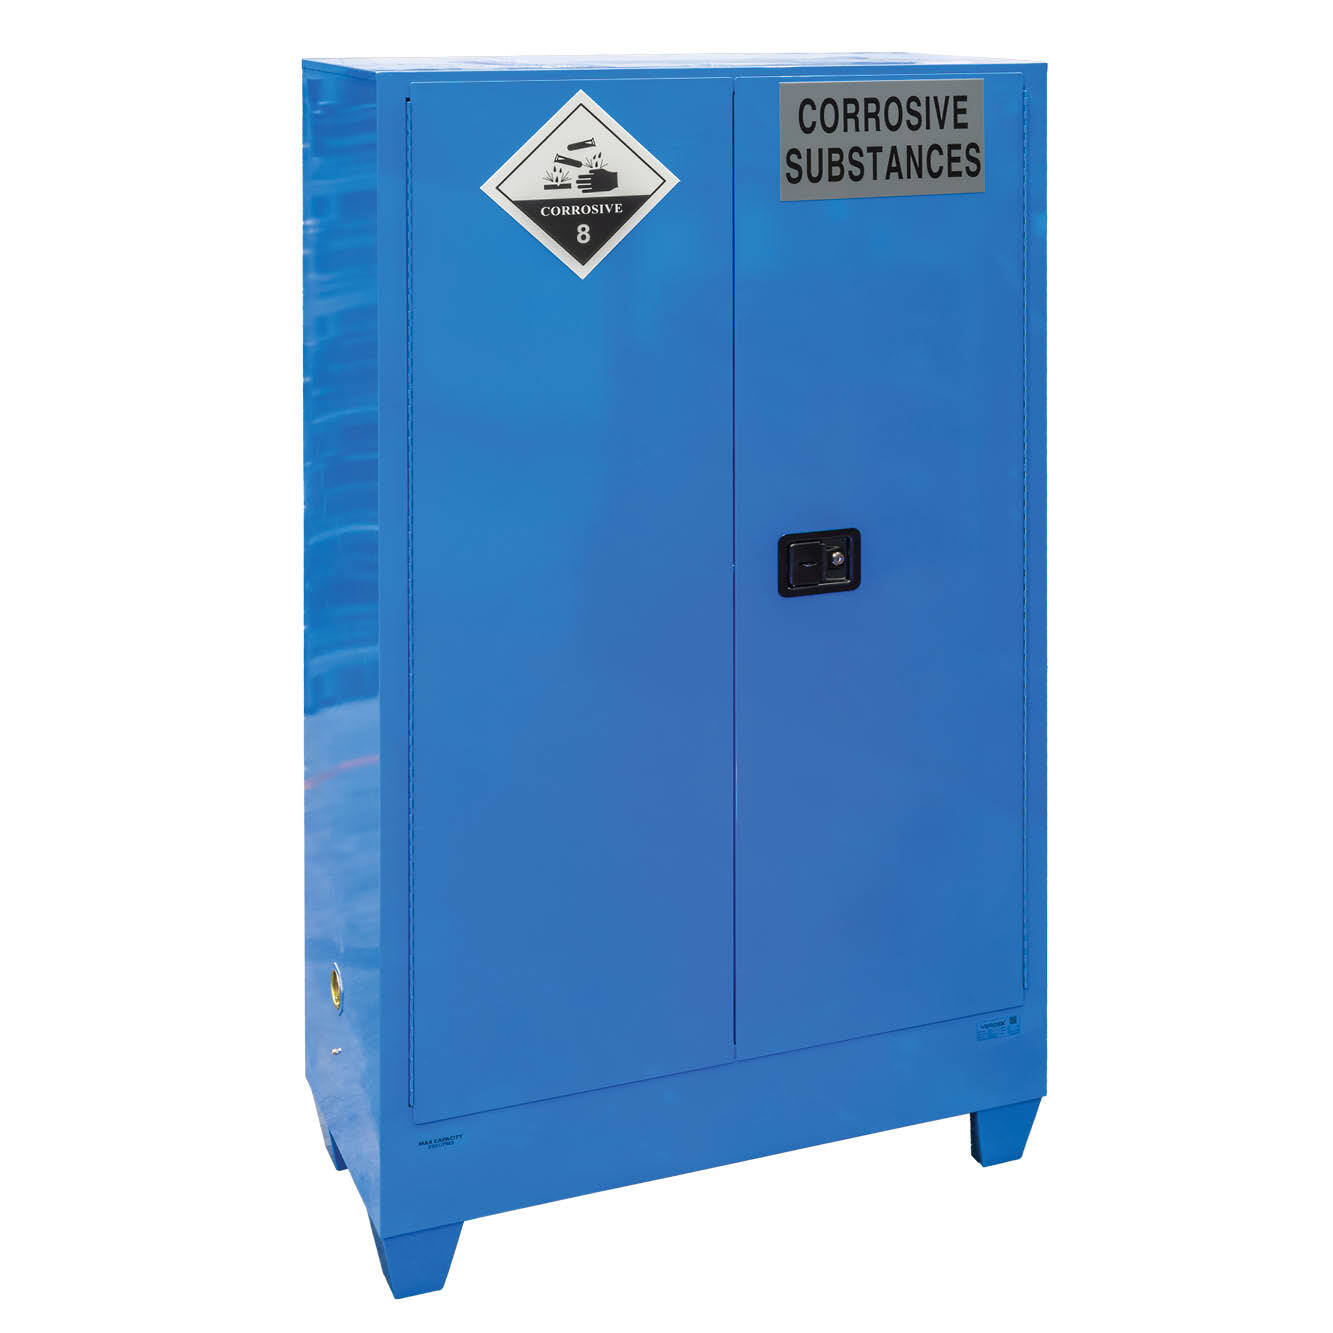 Safety Cabinets For Corrosive Goods - 250L Capacity